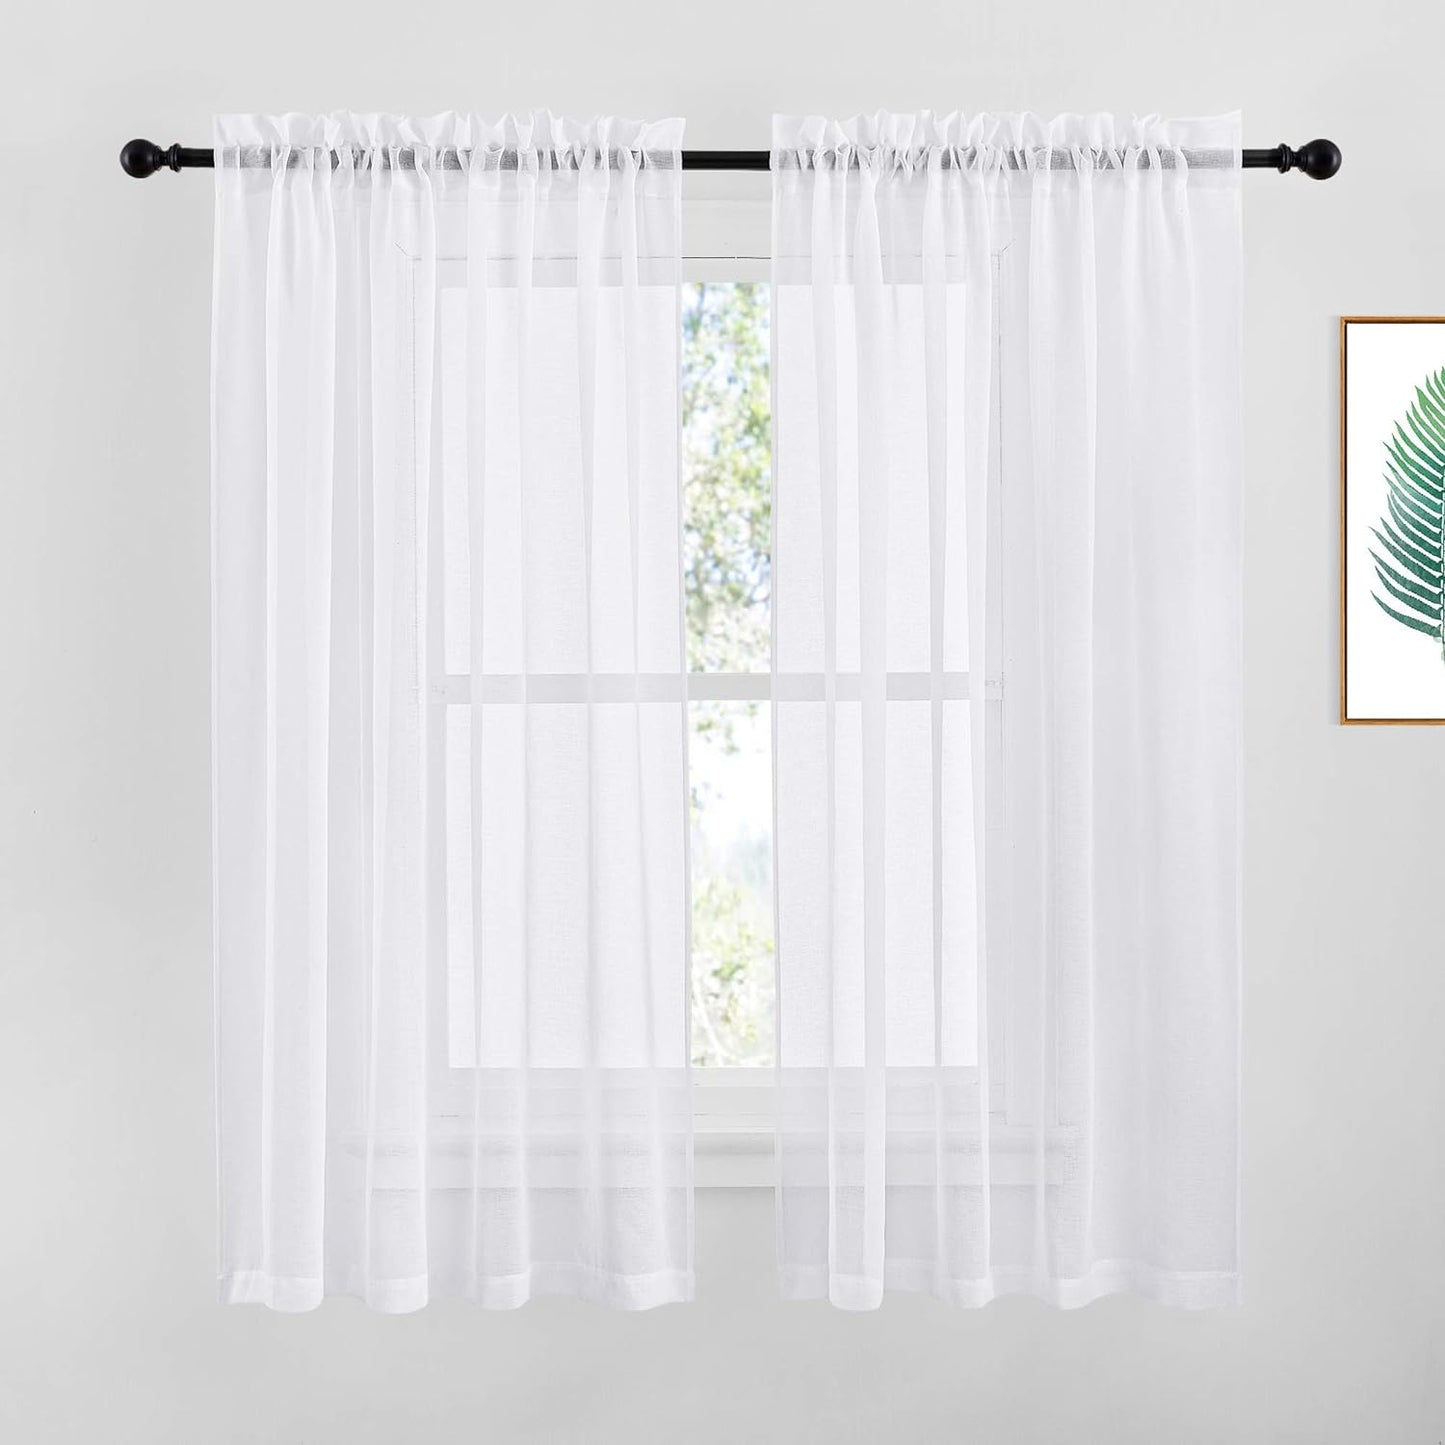 NICETOWN White Semi Sheer Curtains for Living Room- Linen Texture Light Airy Drapes, Rod Pocket & Back Tab Design Voile Panels for Large Window, Set of 2, 55 X 108 Inch  NICETOWN White - Rod Pocket Only W55 X L63 